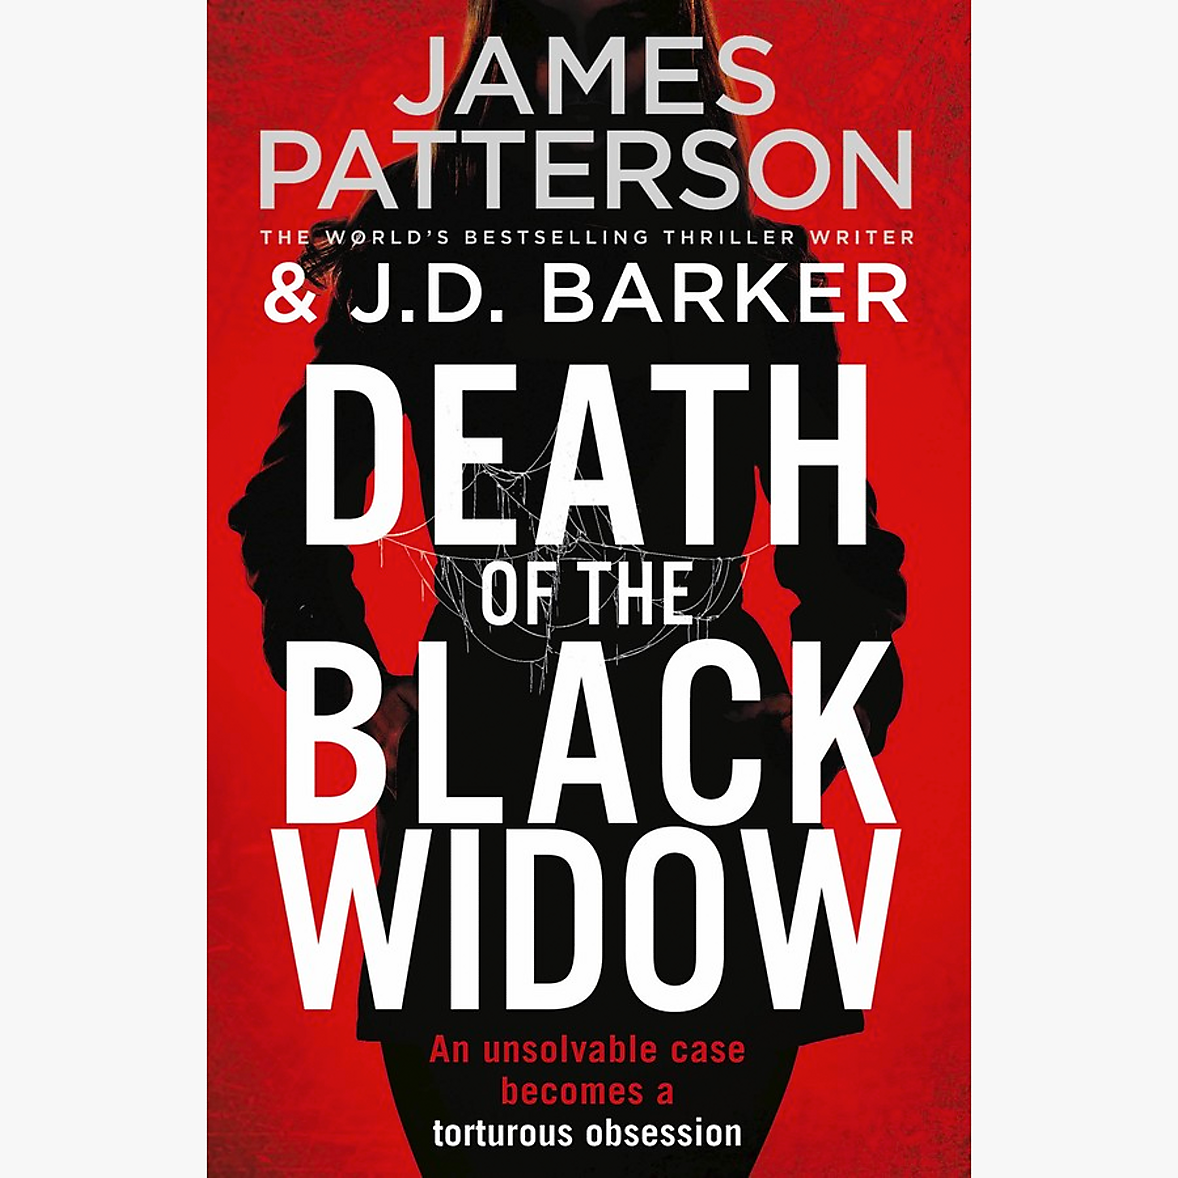 Death of the Black Widow by James Patterson and J.D. Barker